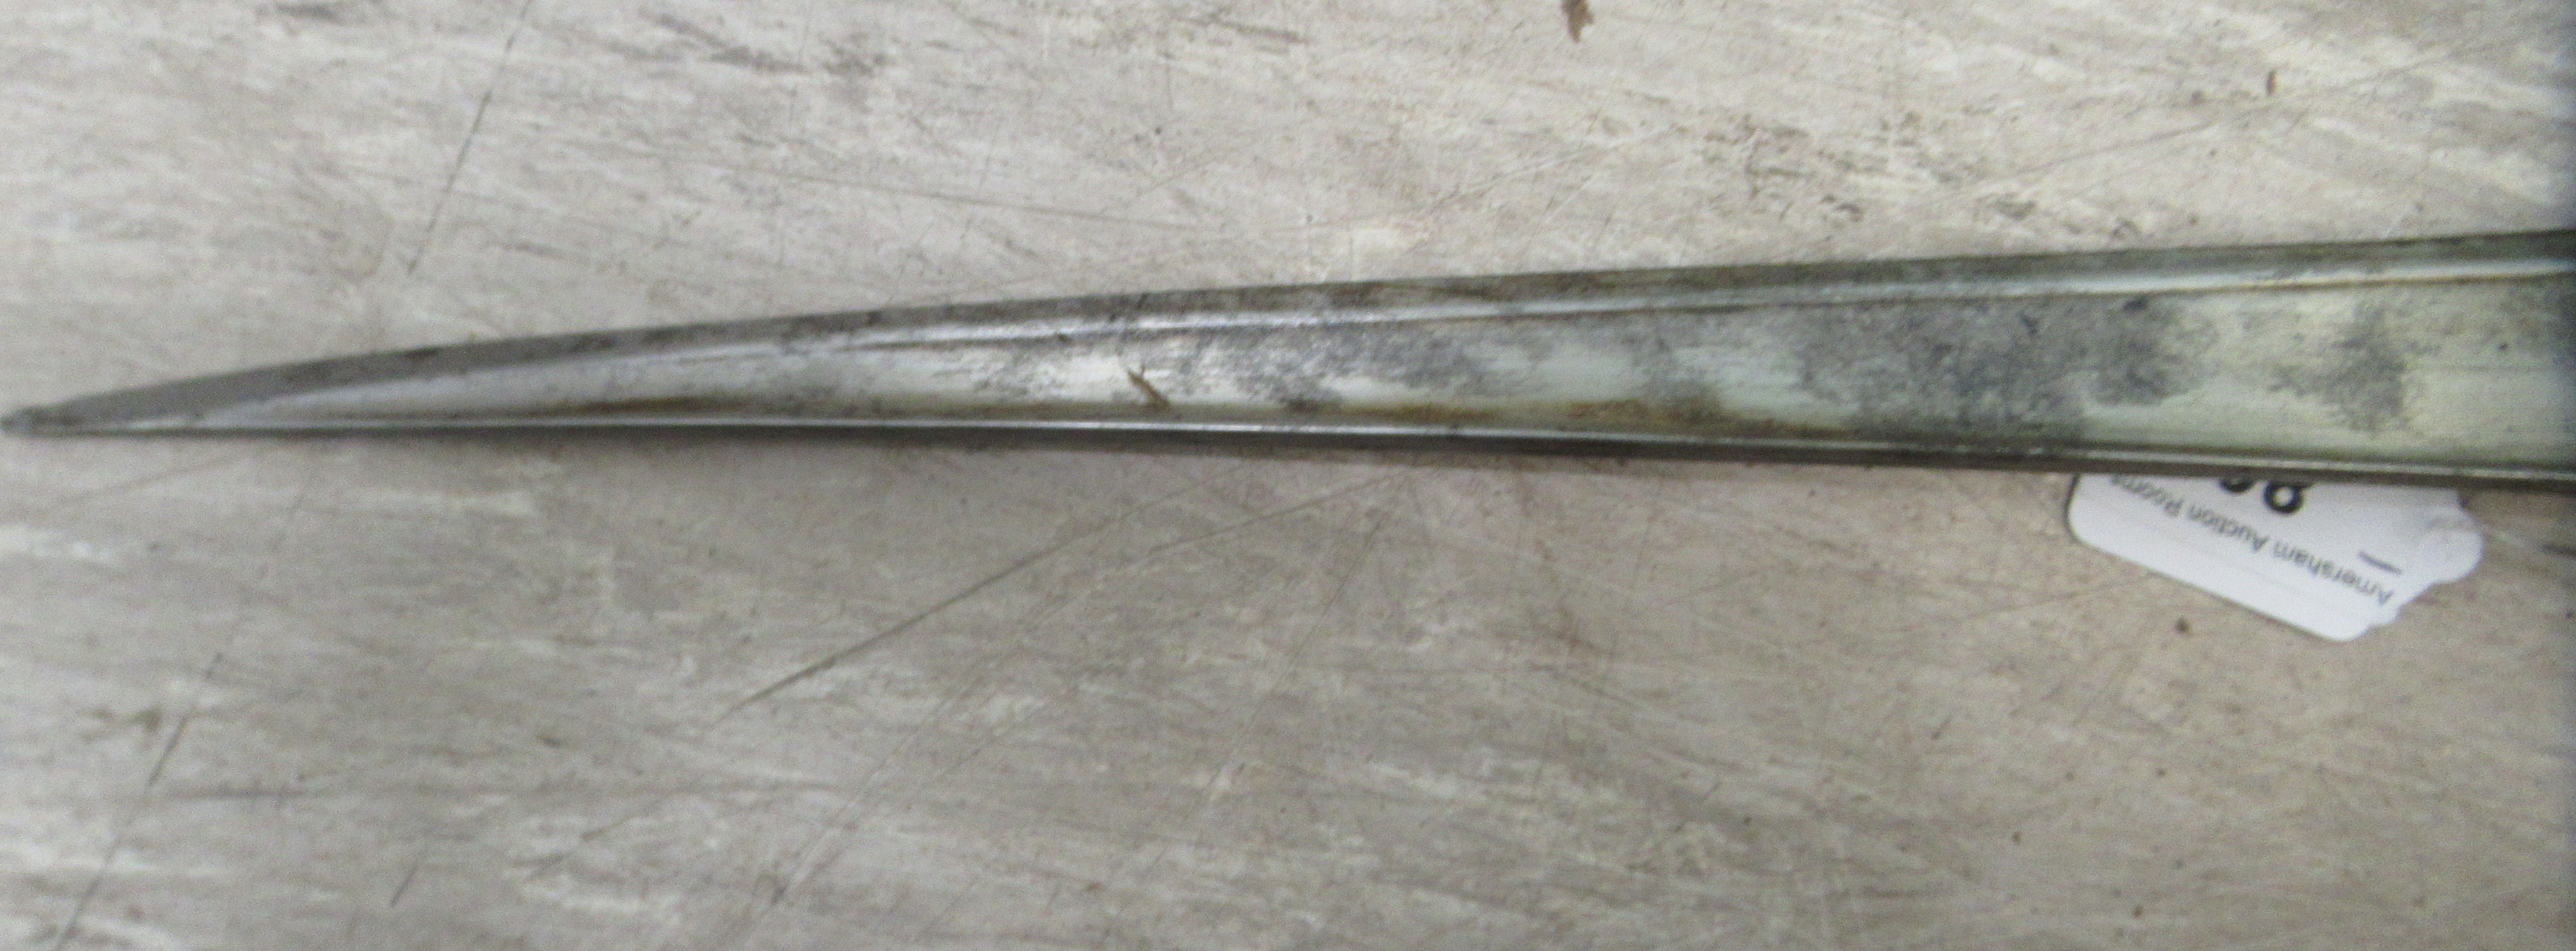 A late 19thC Indo-Persian Pesh-Kabz dagger, on an ivory clad handle  the blade 12"L in a hide - Image 4 of 8